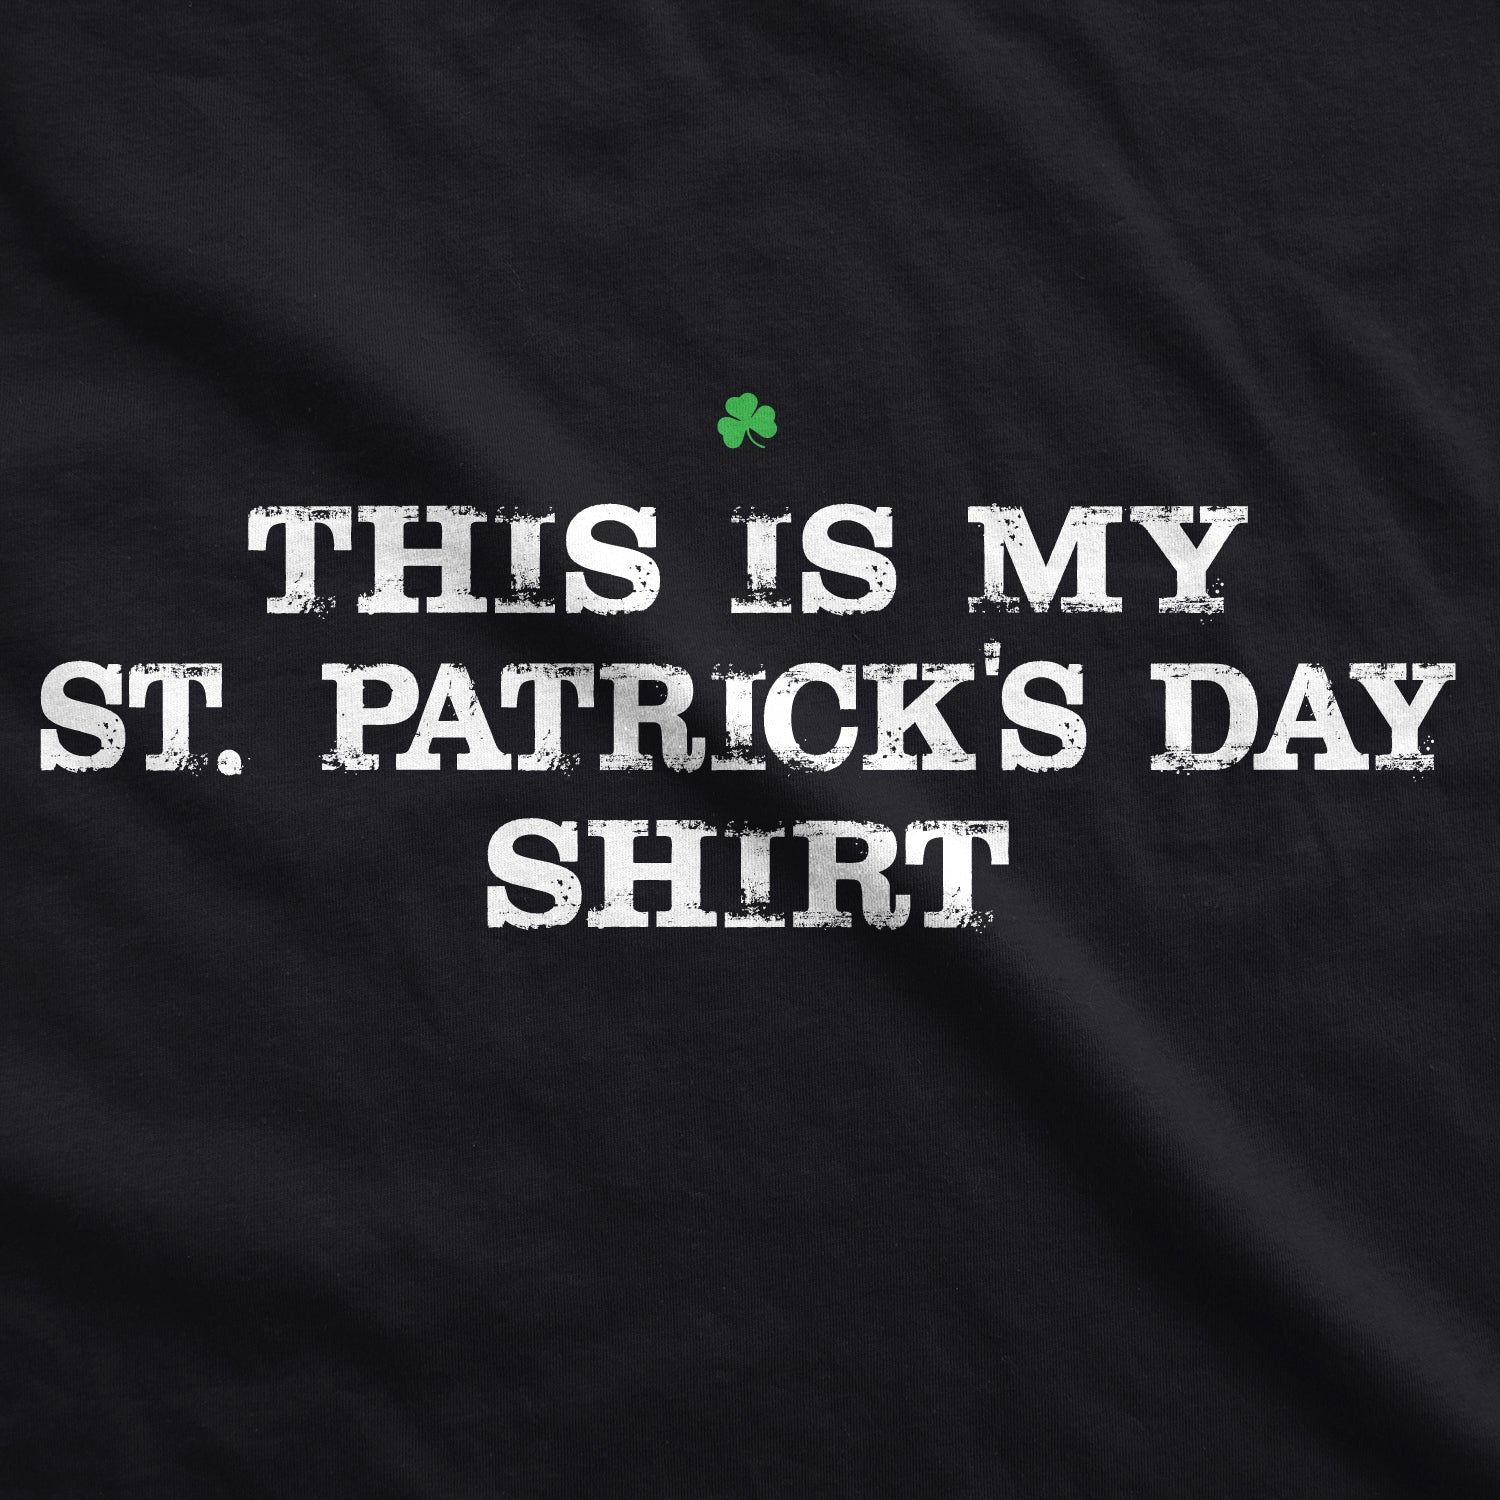 Funny Black This Is My St. Patrick's Day T-Shirt Mens T Shirt Nerdy Saint Patrick's Day Sarcastic Tee